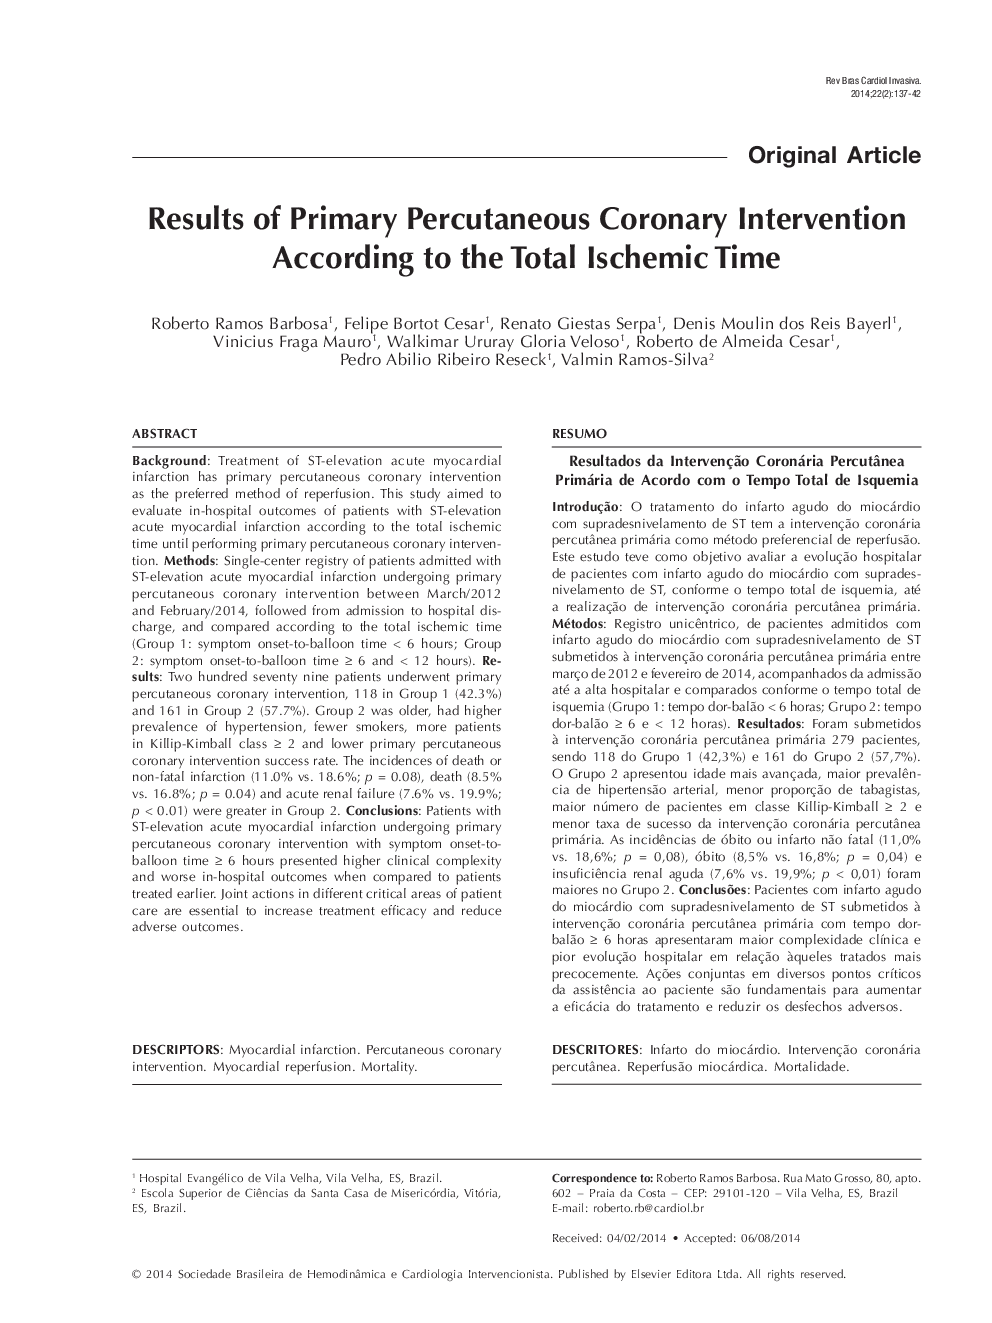 Results of Primary Percutaneous Coronary Intervention According to the Total Ischemic Time